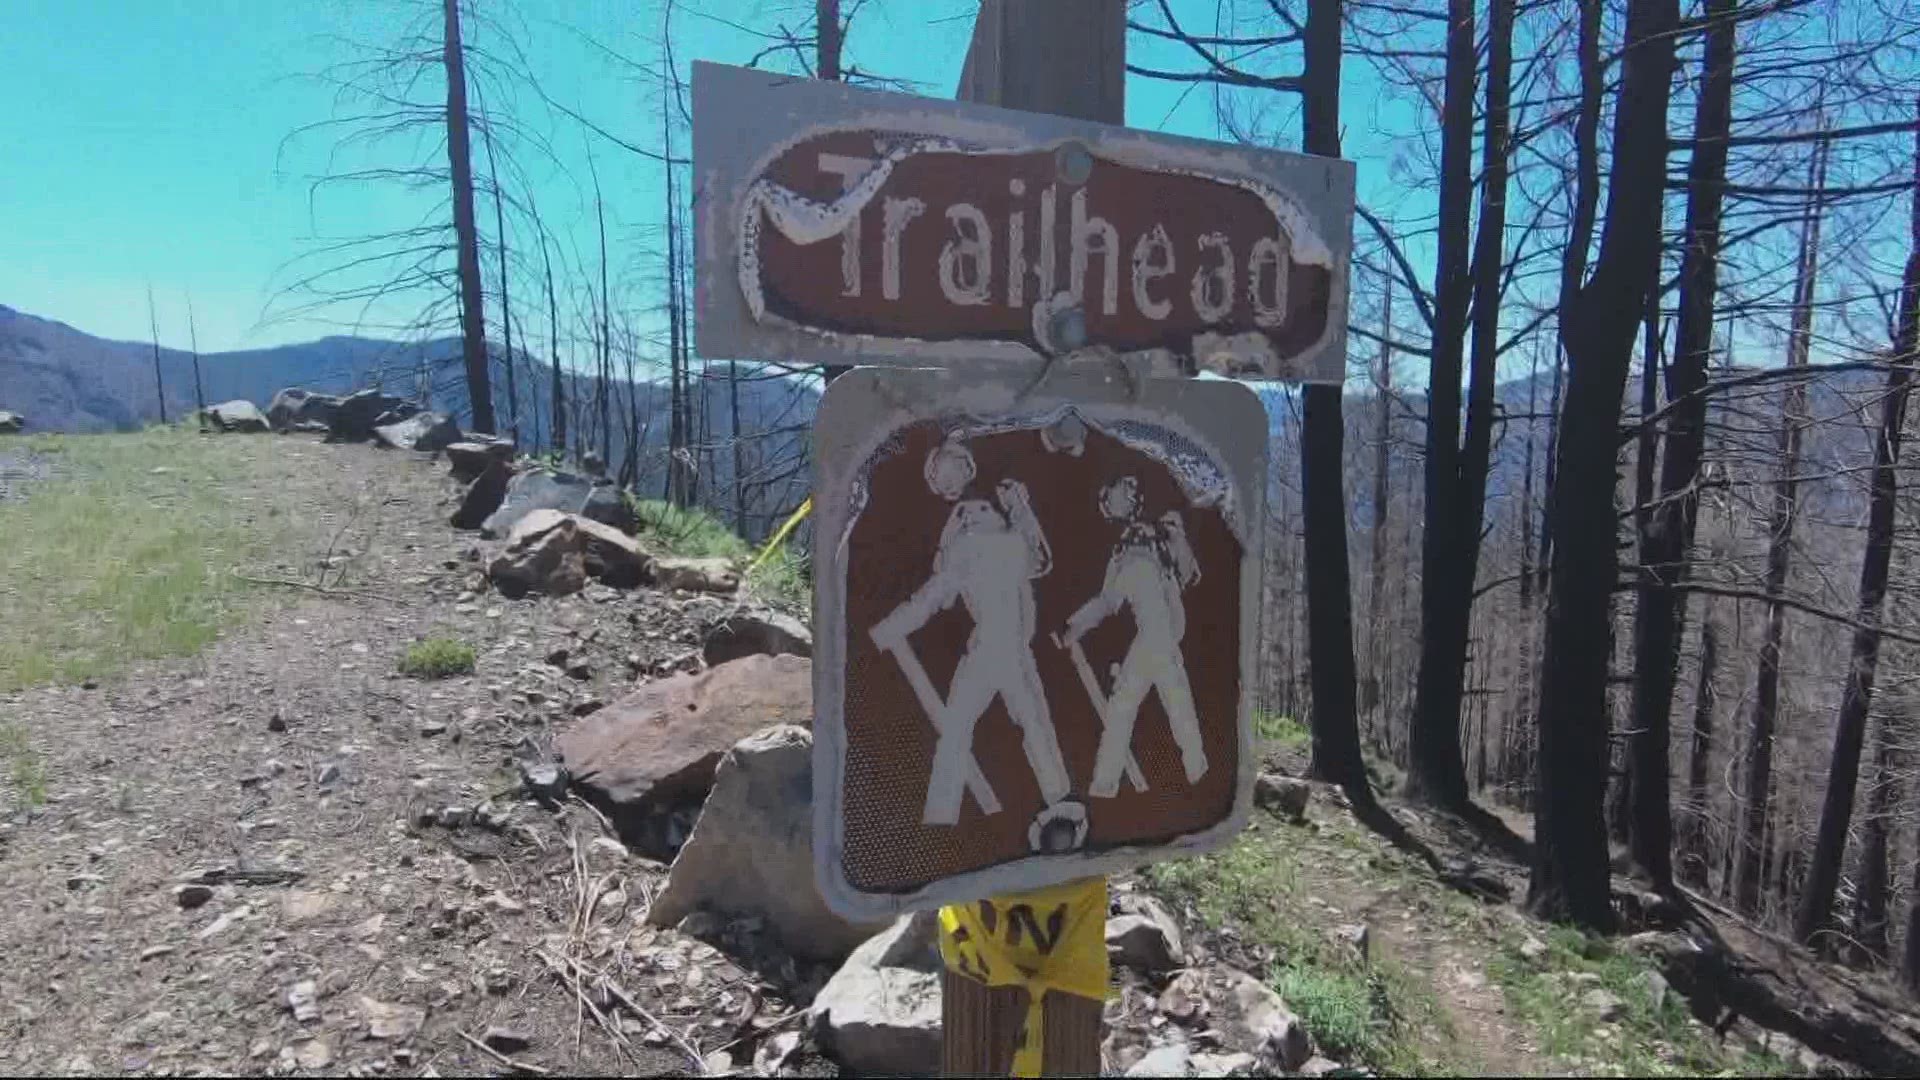 For the first time since the 2020 wilfdire season, we take you through some of the still closed Santiam Canyon trails